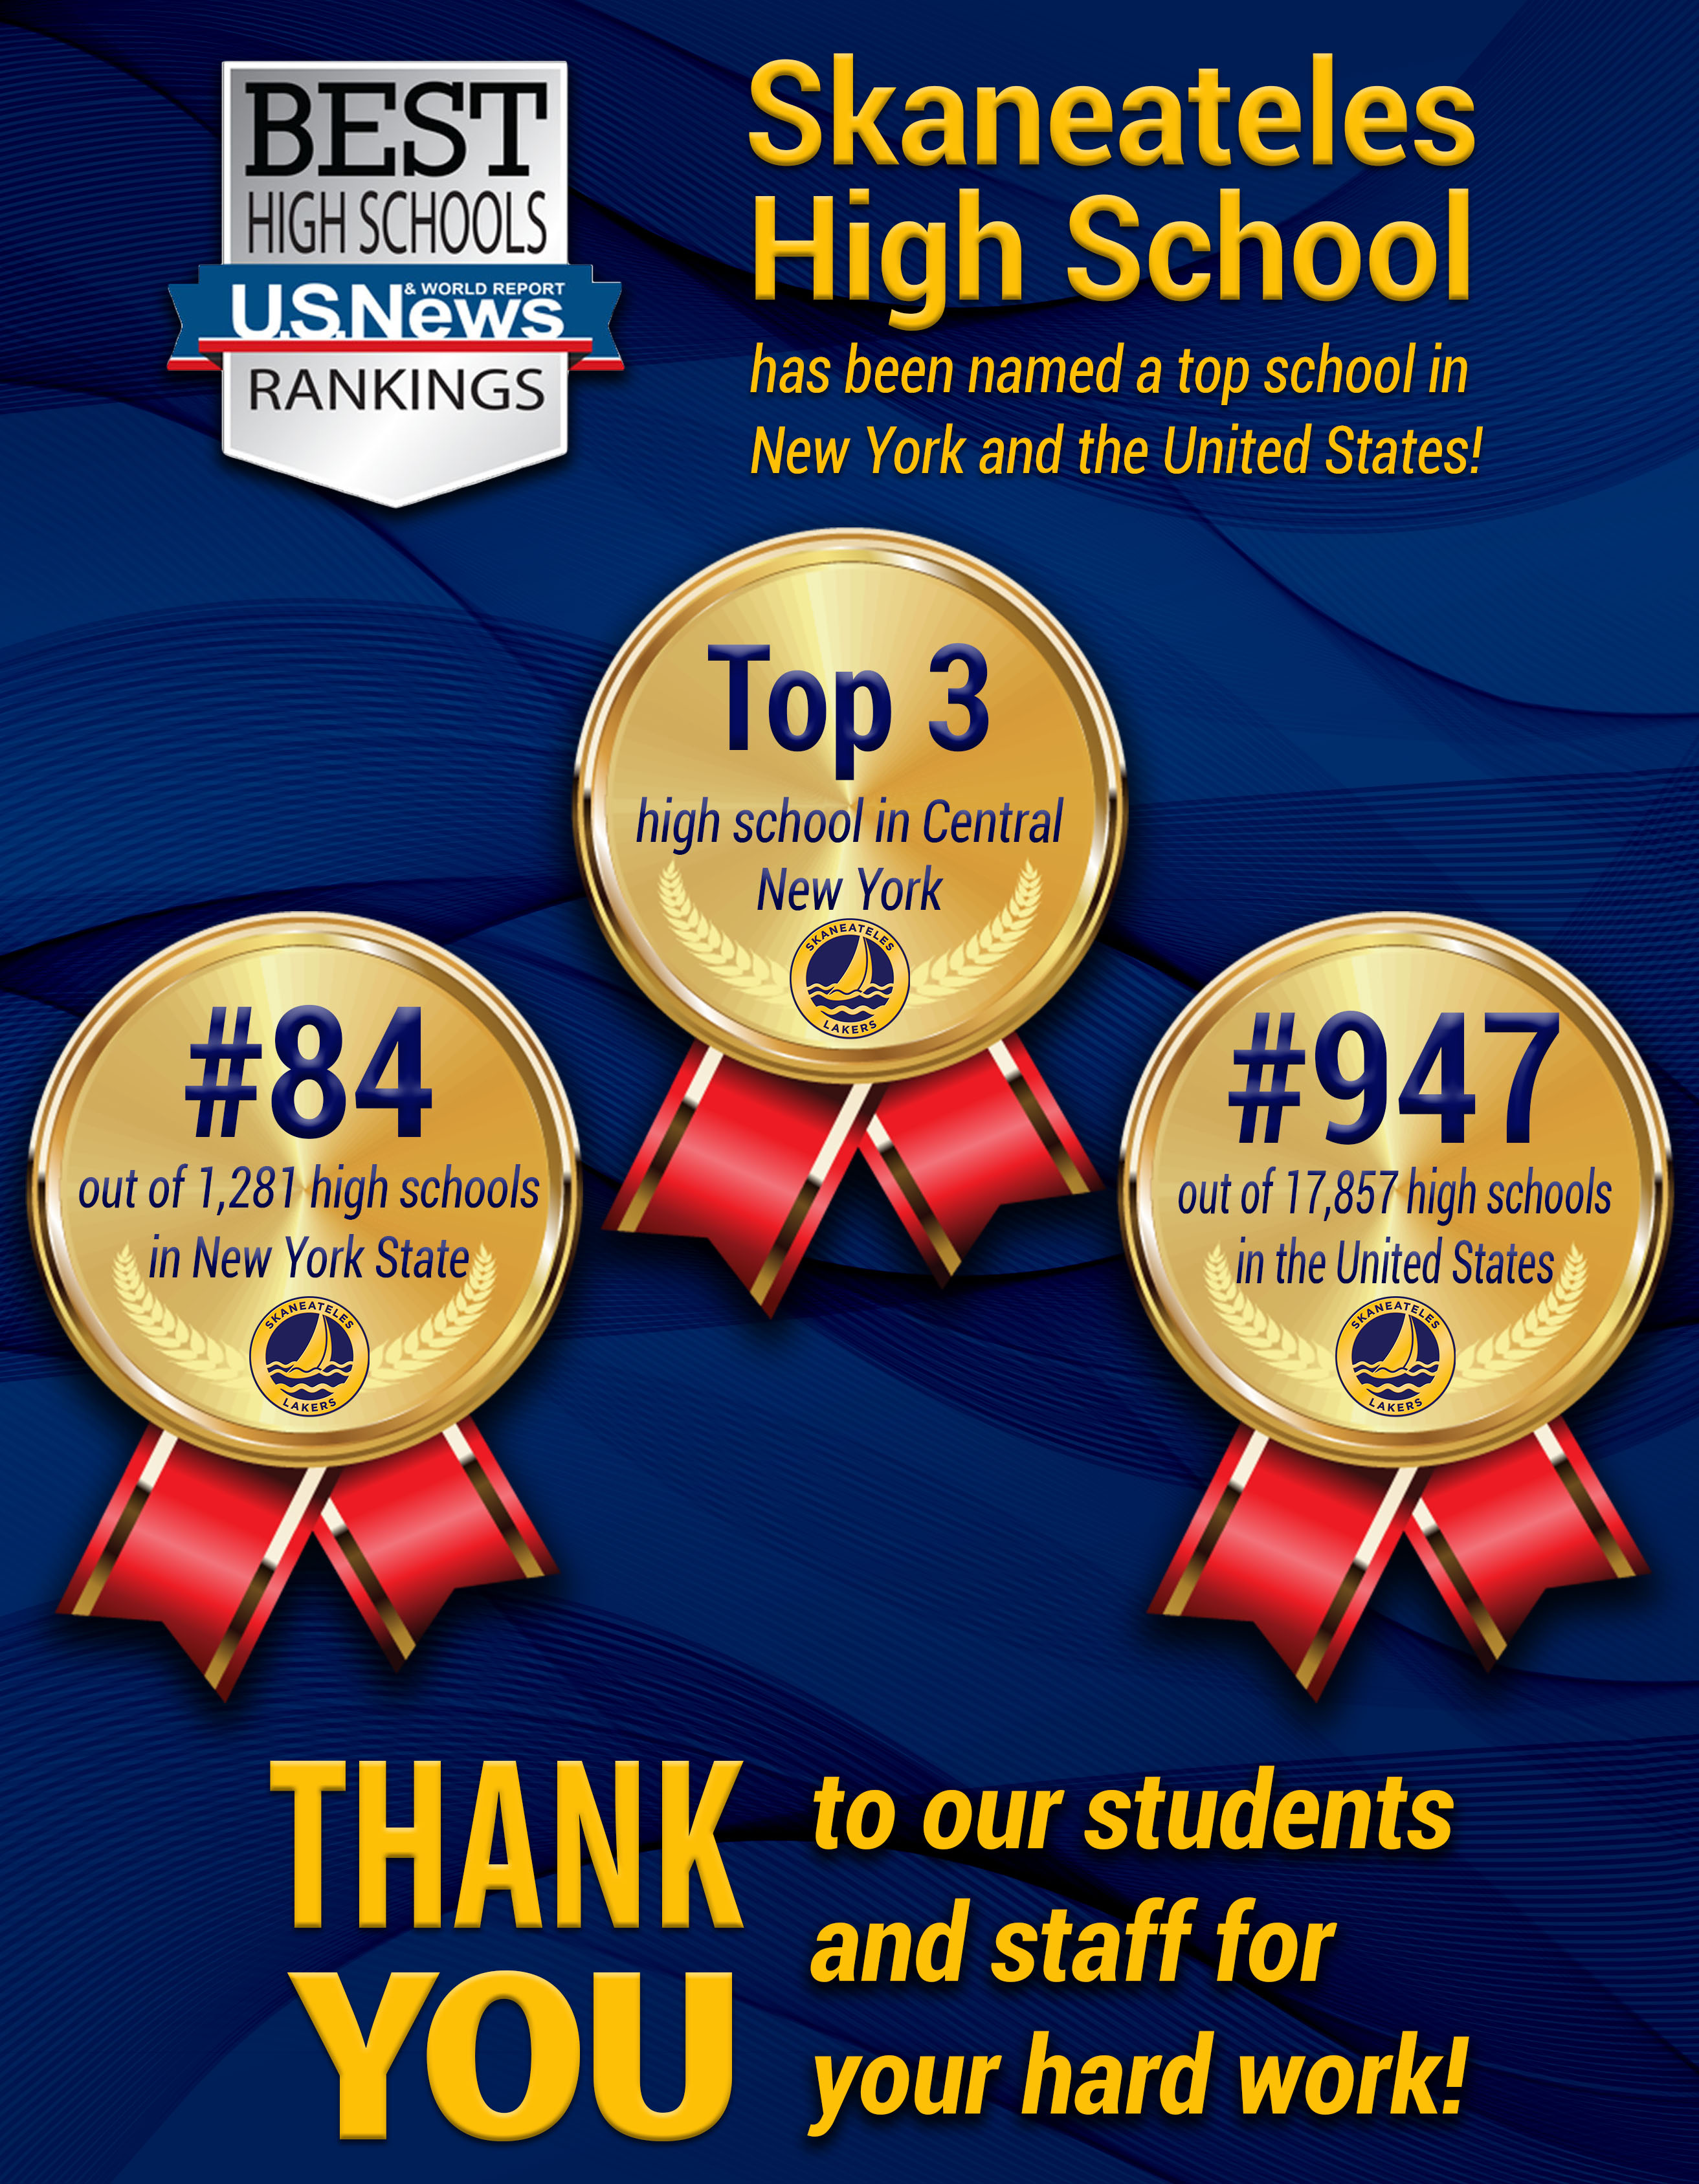 Skaneateles High School has been named a top school in New York and the United States